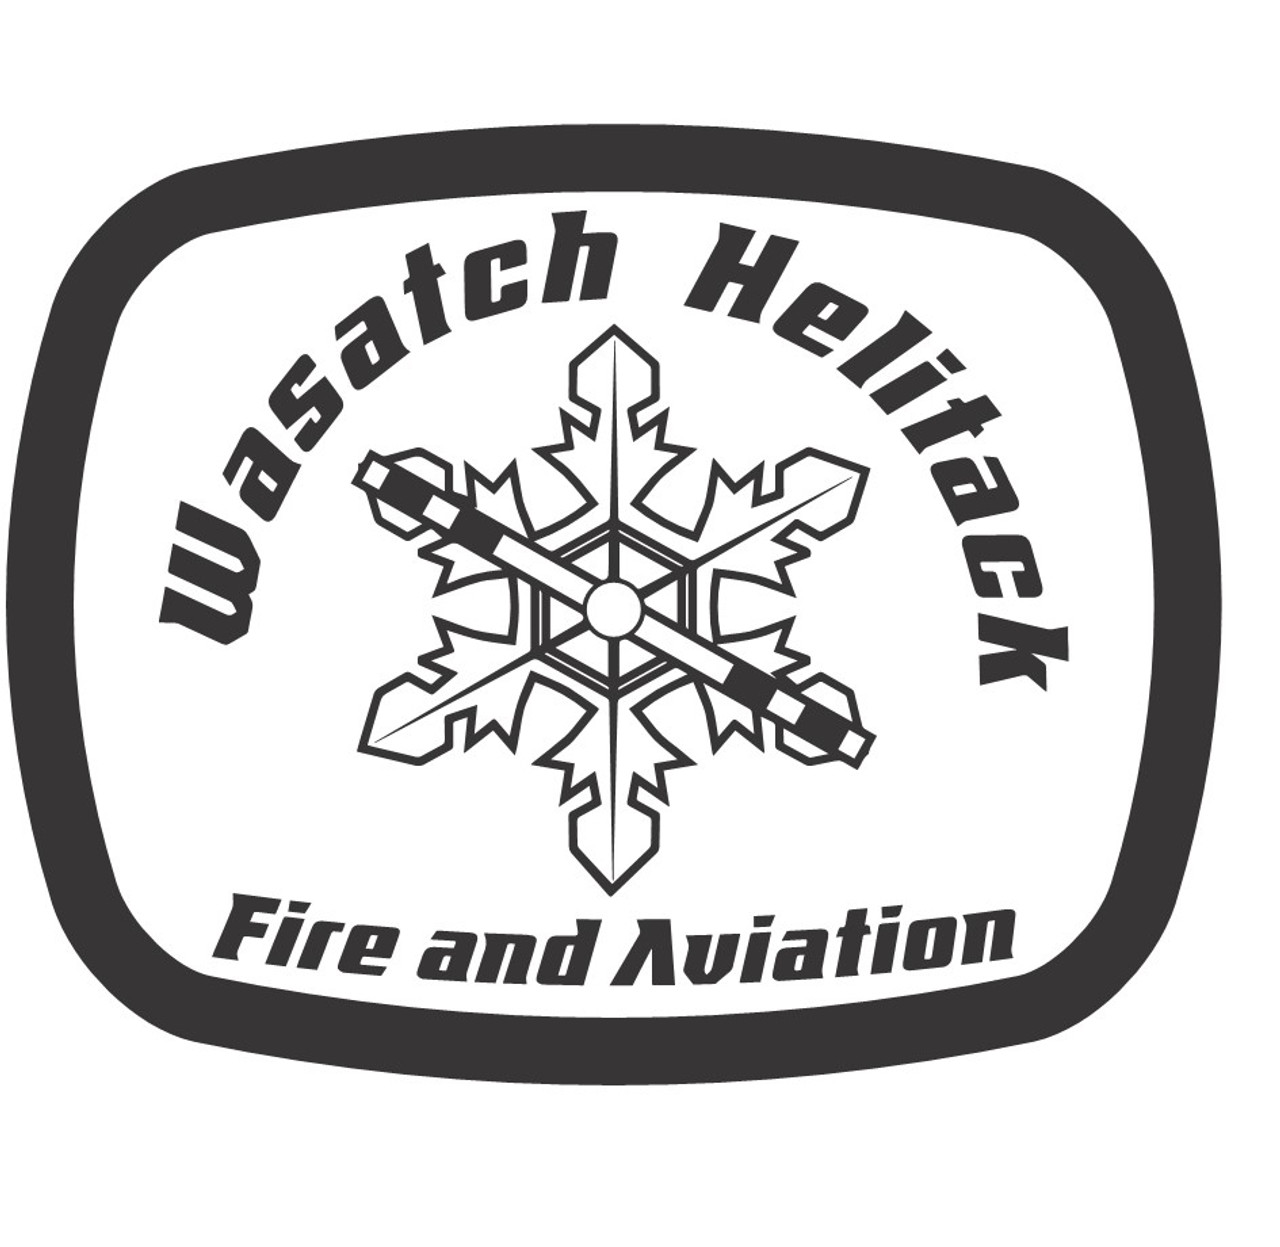 Wasatch Helitack Fire and Aviation Buckle (RESTRICTED) 